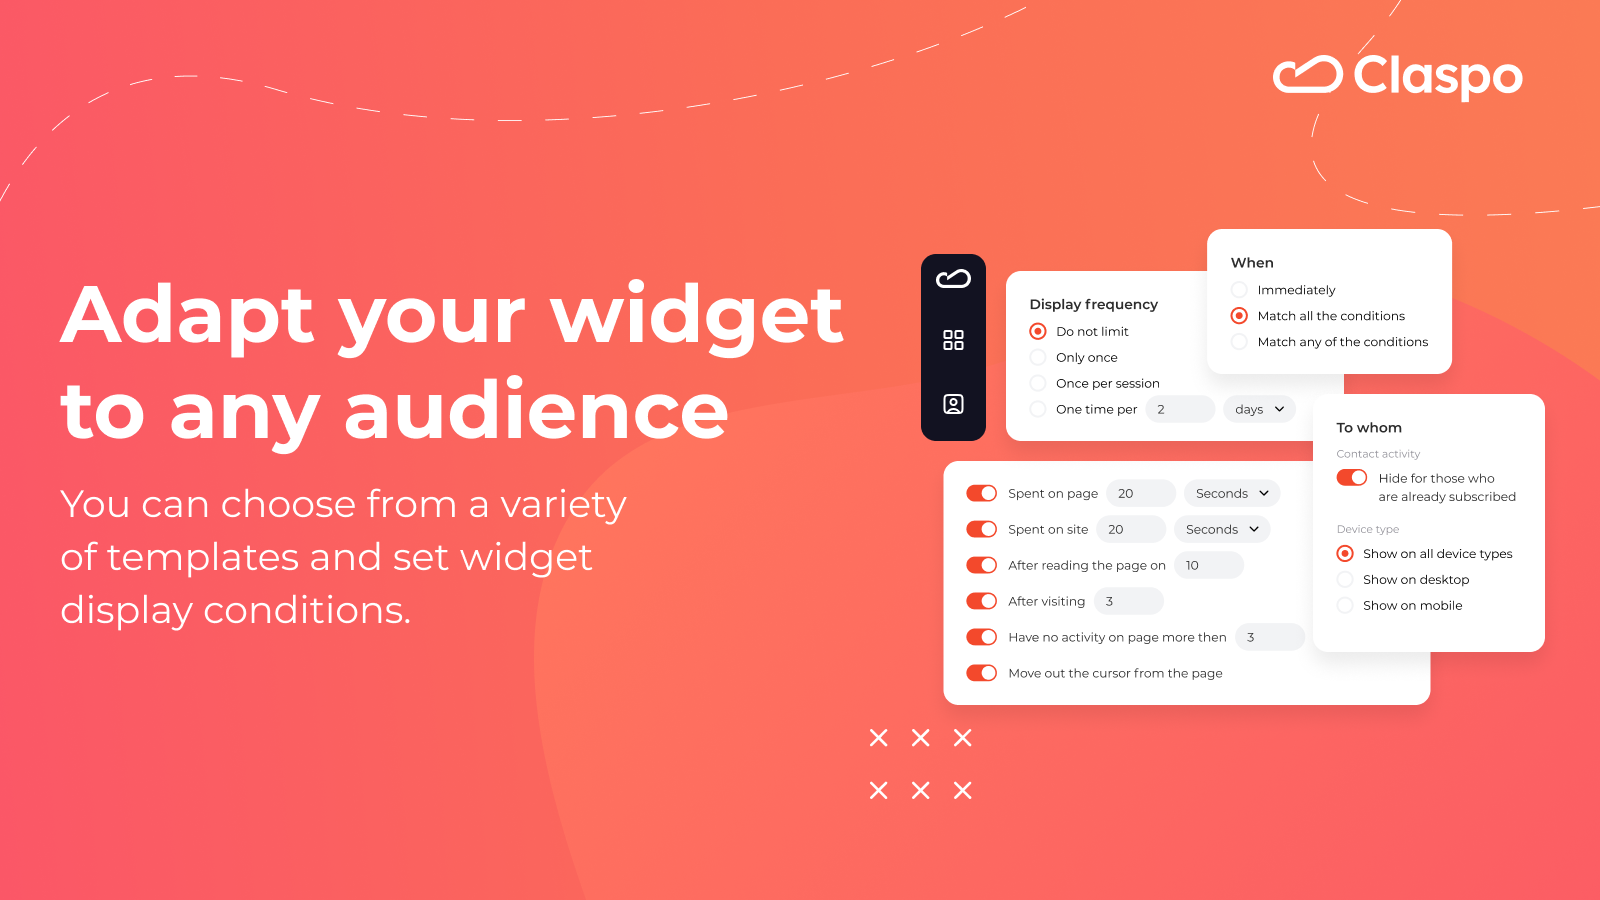 Adapt your widget to any audience